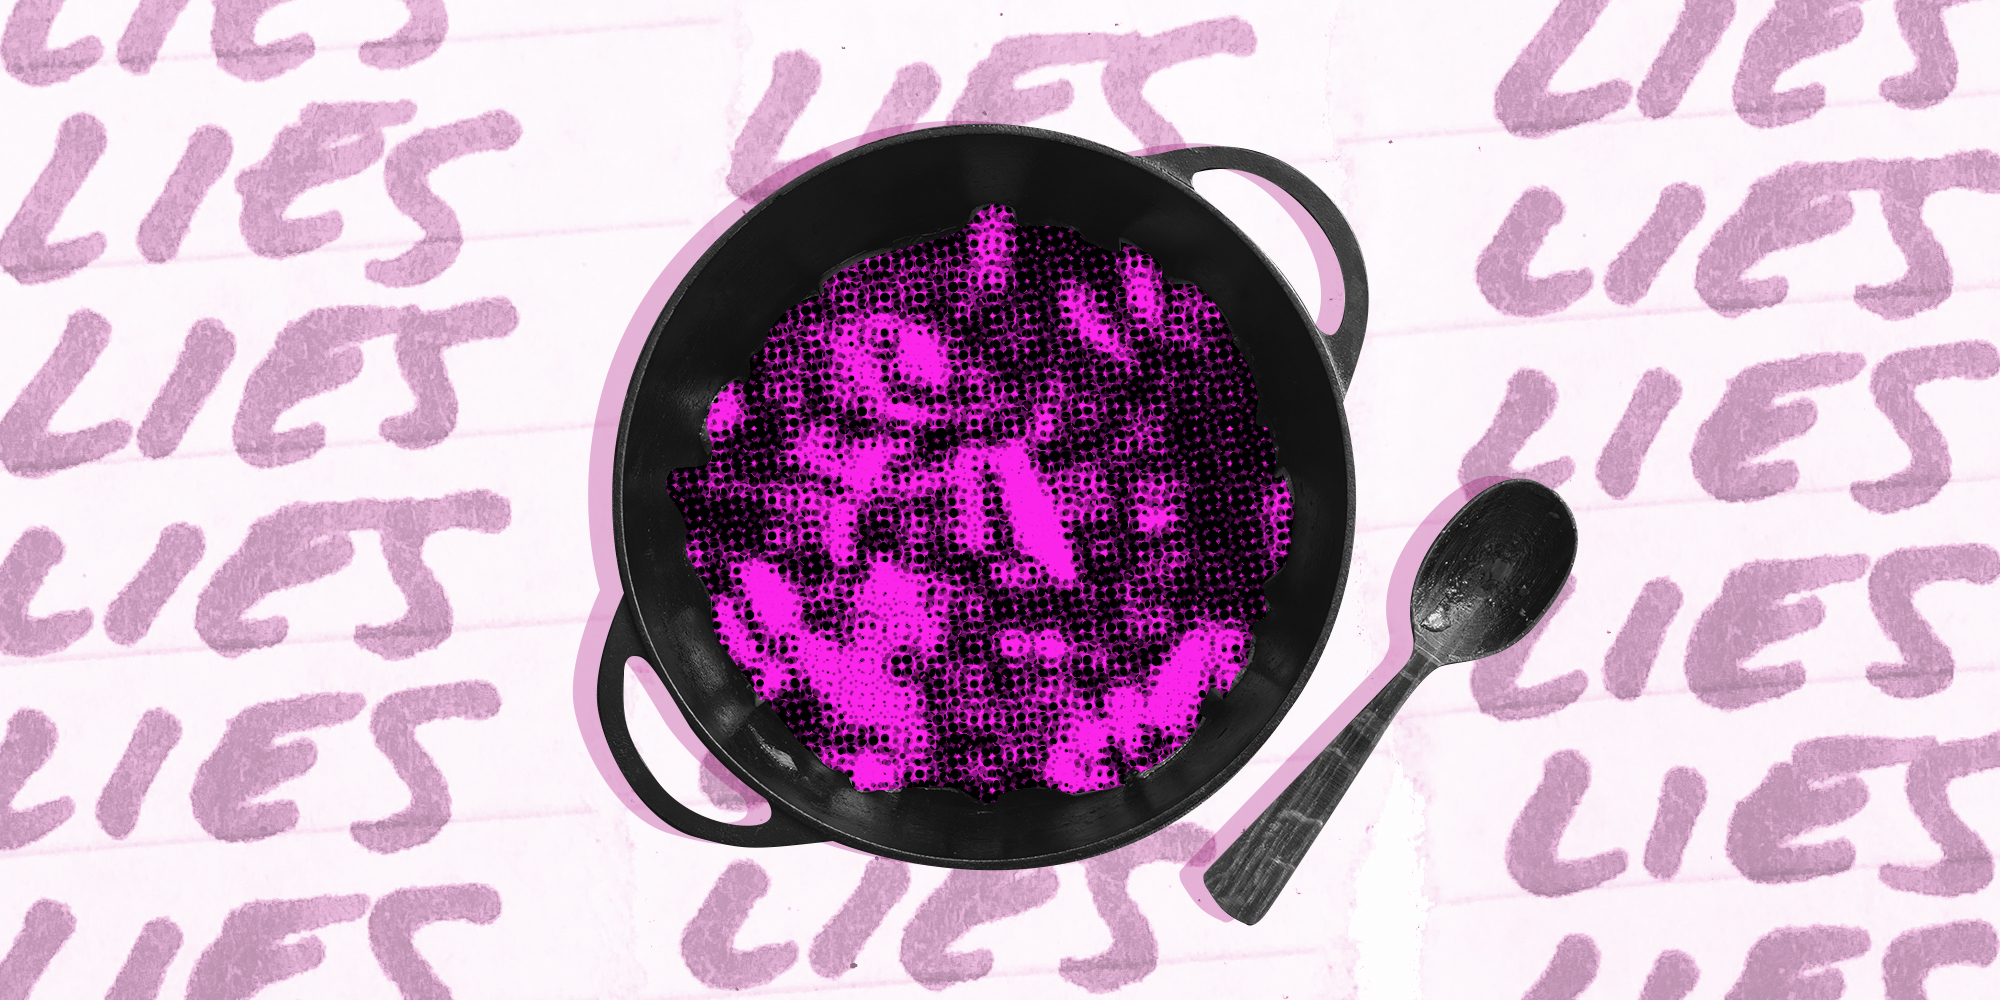 stew pot from above with a bg that says "lies" repeating